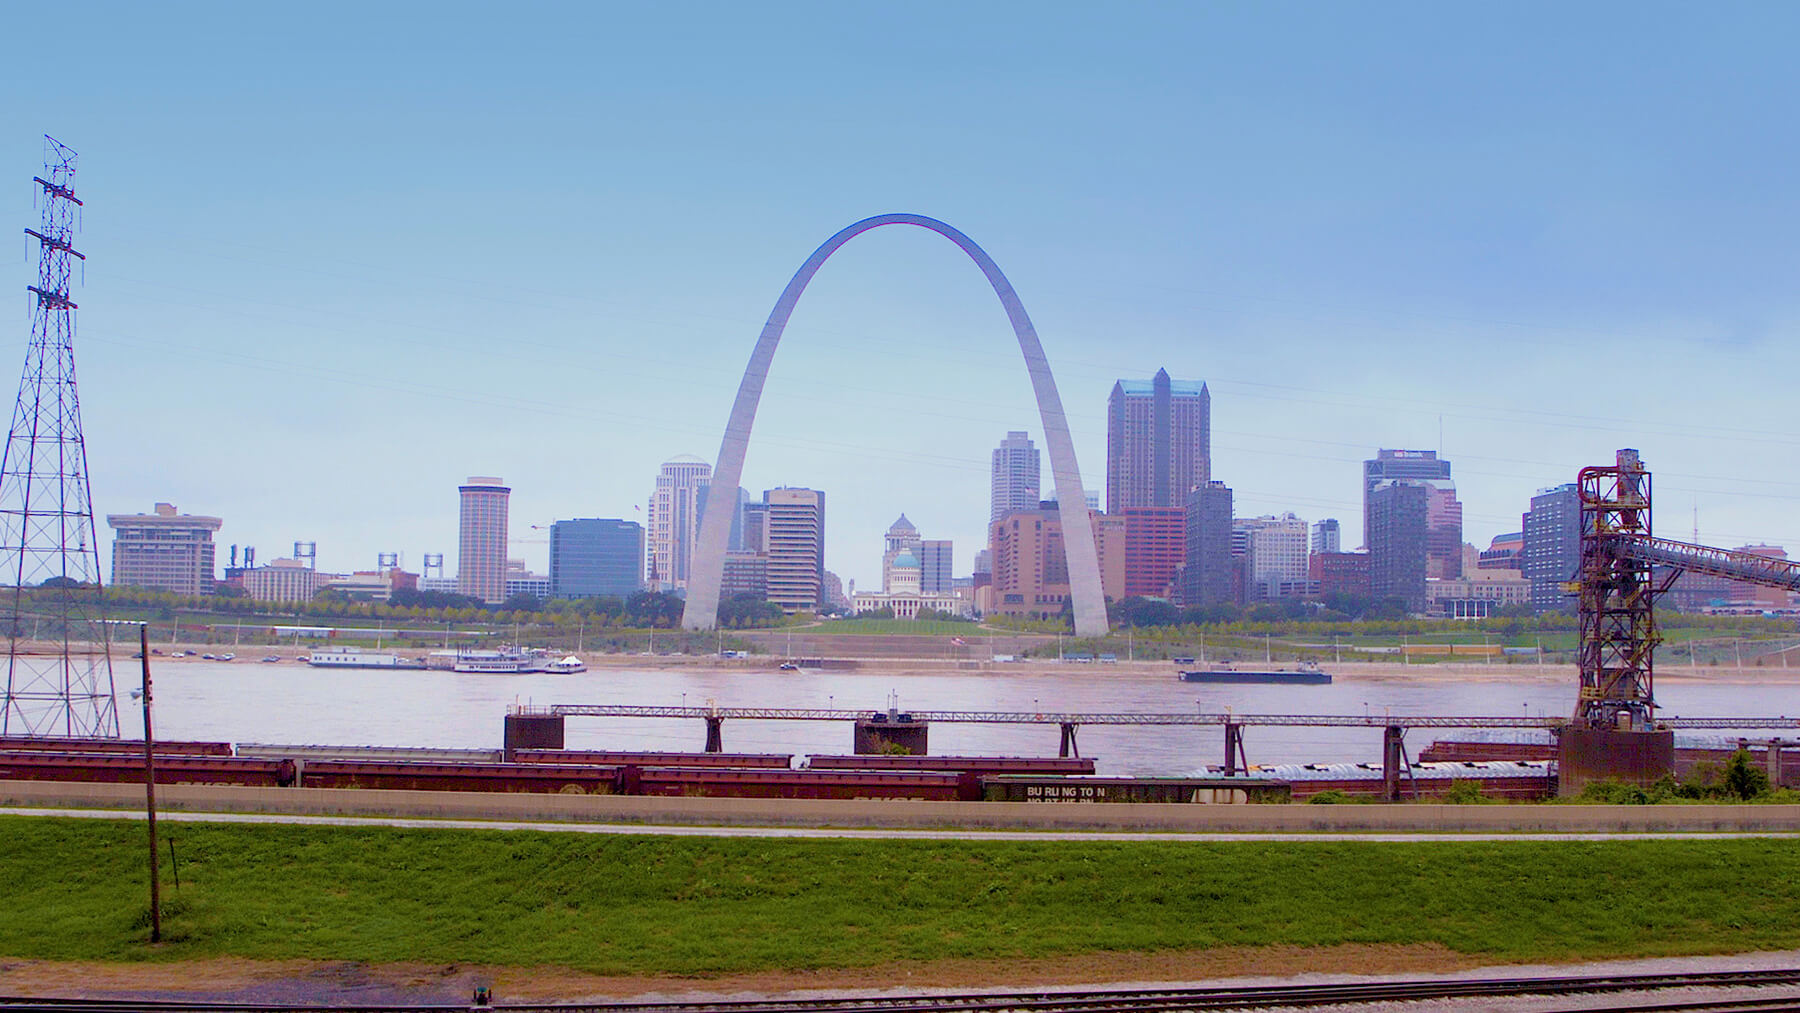 Downtown St. Louis featuring the Gateway Arch.